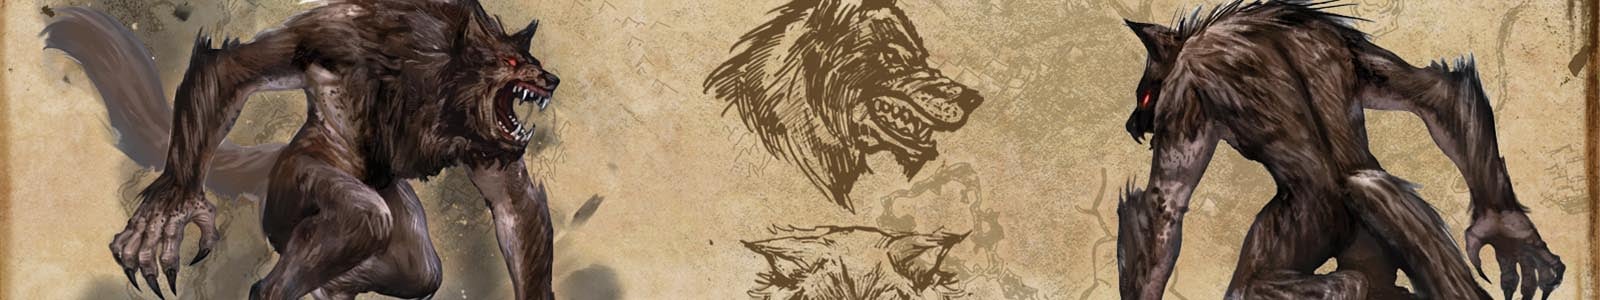 How to become a Werewolf in ESO Guide header